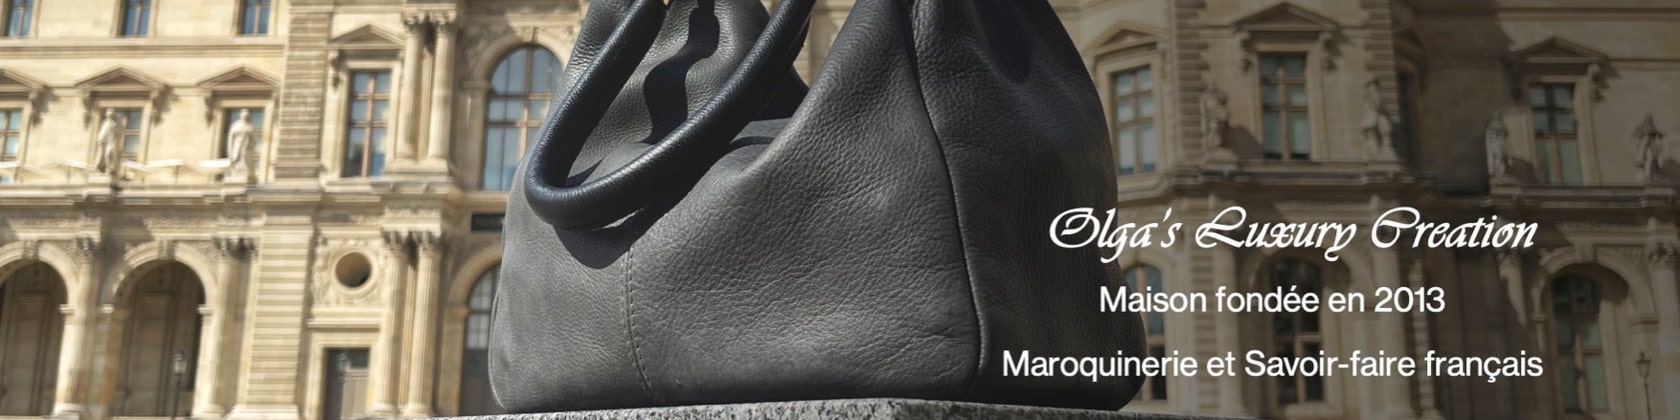 Counter Against the Counterfeit Luxury Handbags, by Michelle Swindle